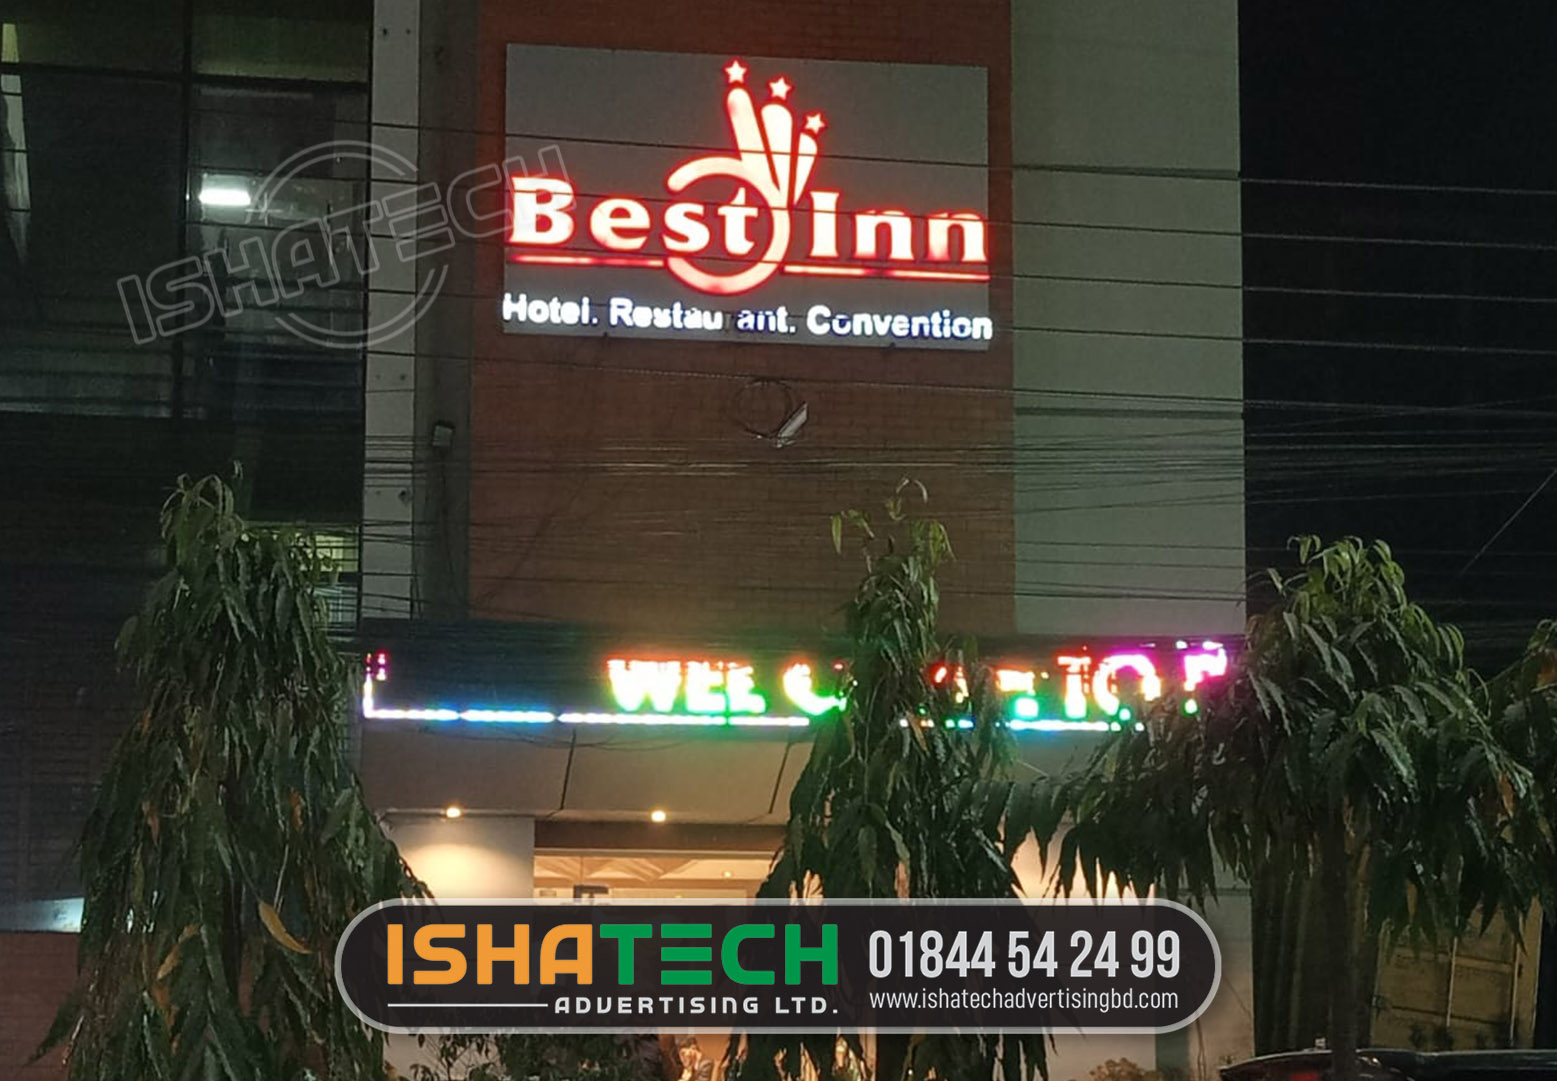 Best Inn Hotel Restaurant And Convention Hall Outdoor Letter Sign Board in Bangladesh